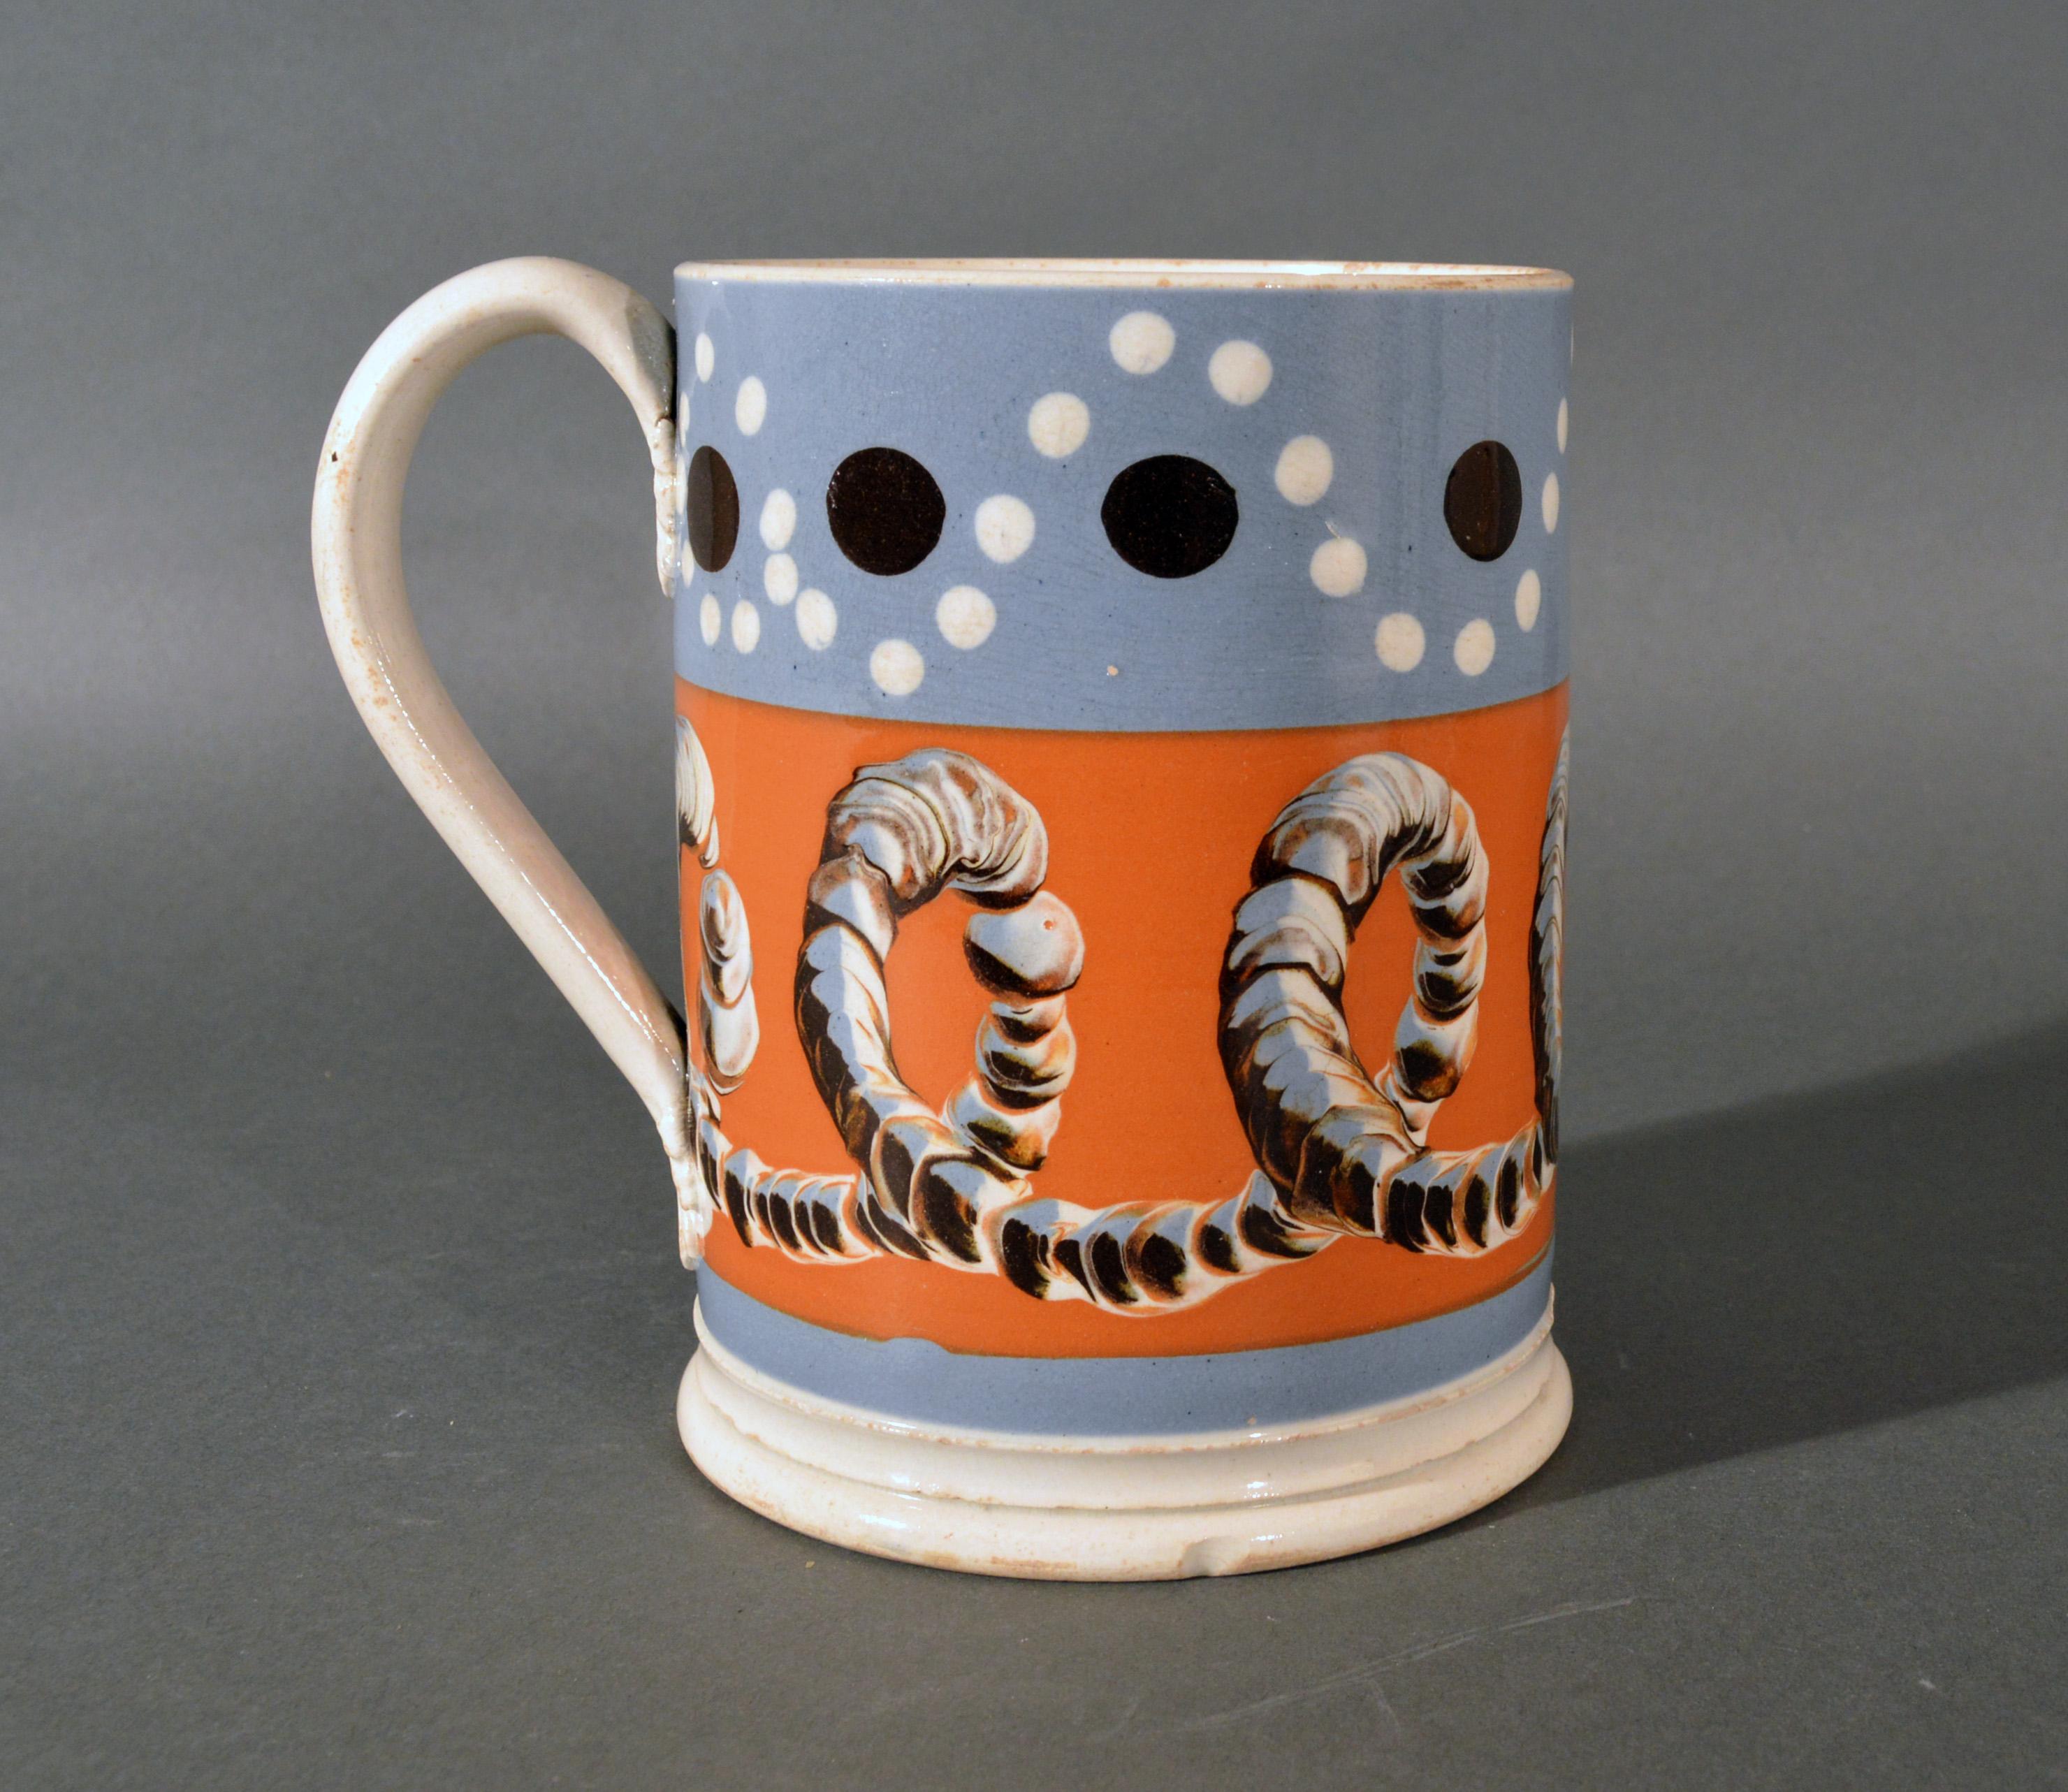 Mocha Tankard with earthworm and dot decoration,
early 19th century
(Ref: NY9366-npim)

Fabulous large tankard or mug decorated with slip bands in an unusual light blue and ochre. The central ochre band with a three-color earthworm design while